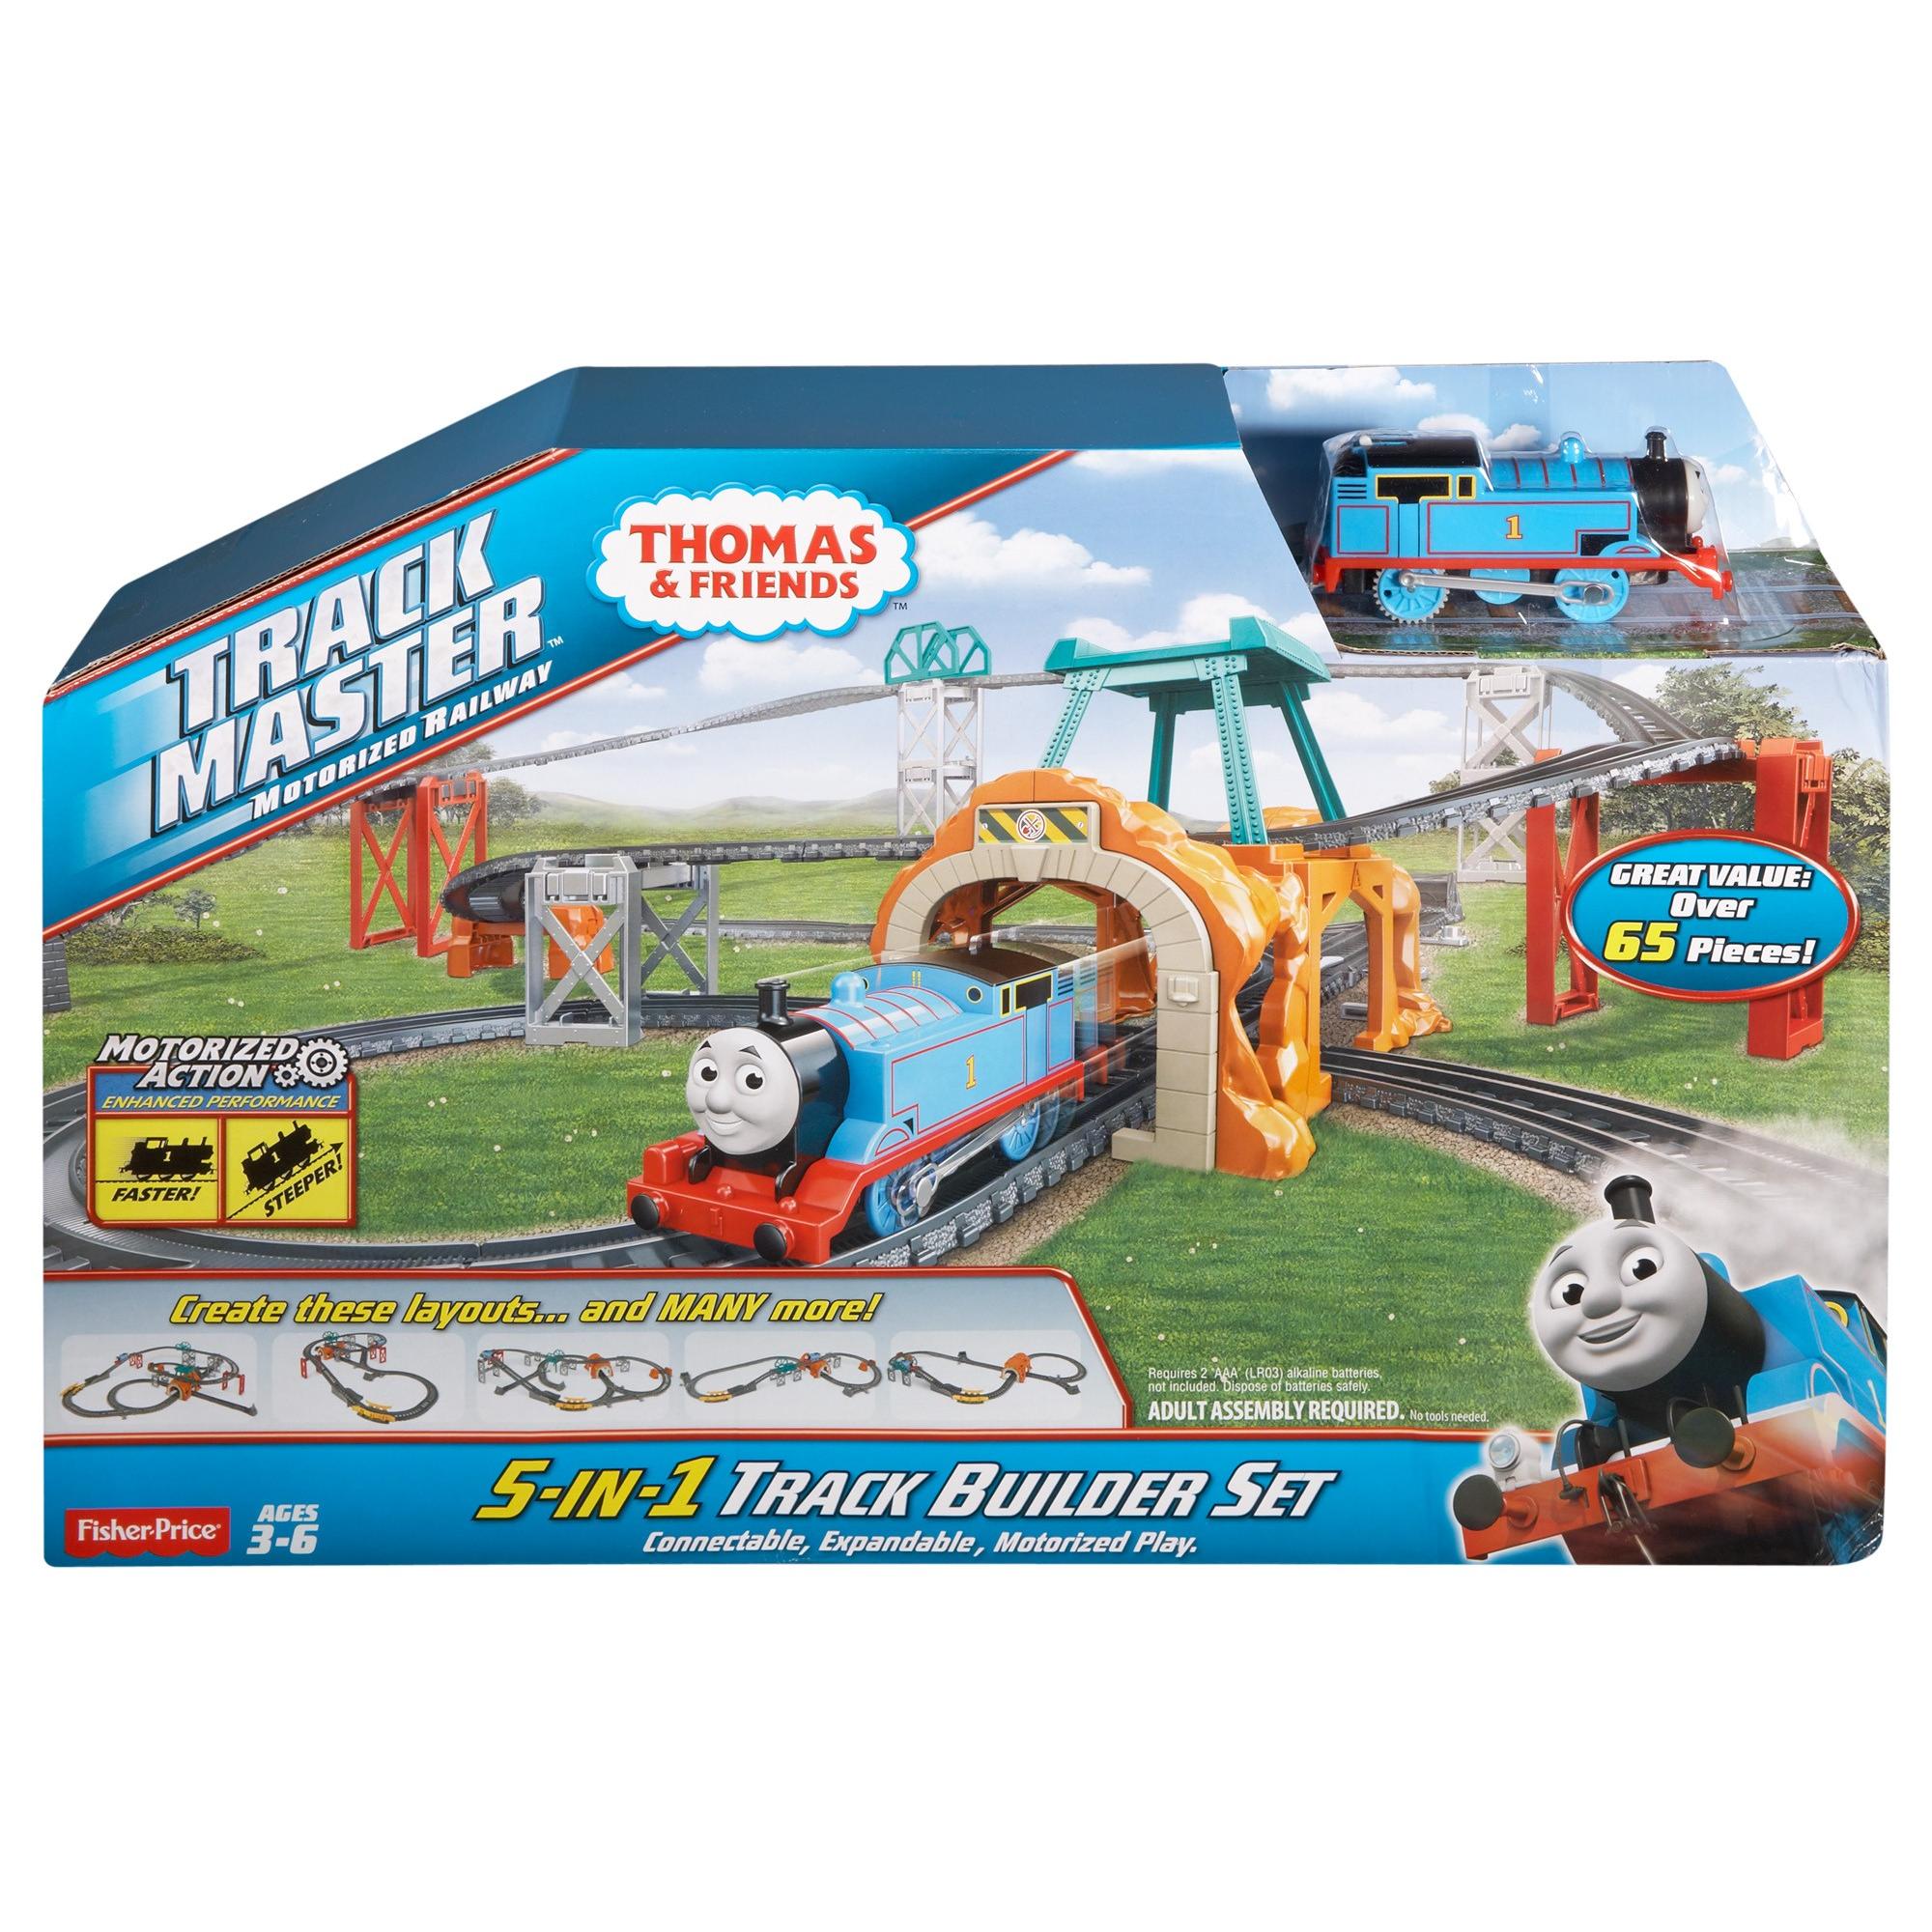 Thomas & Friends TrackMaster 5-in-1 Track Builder Set - image 7 of 7